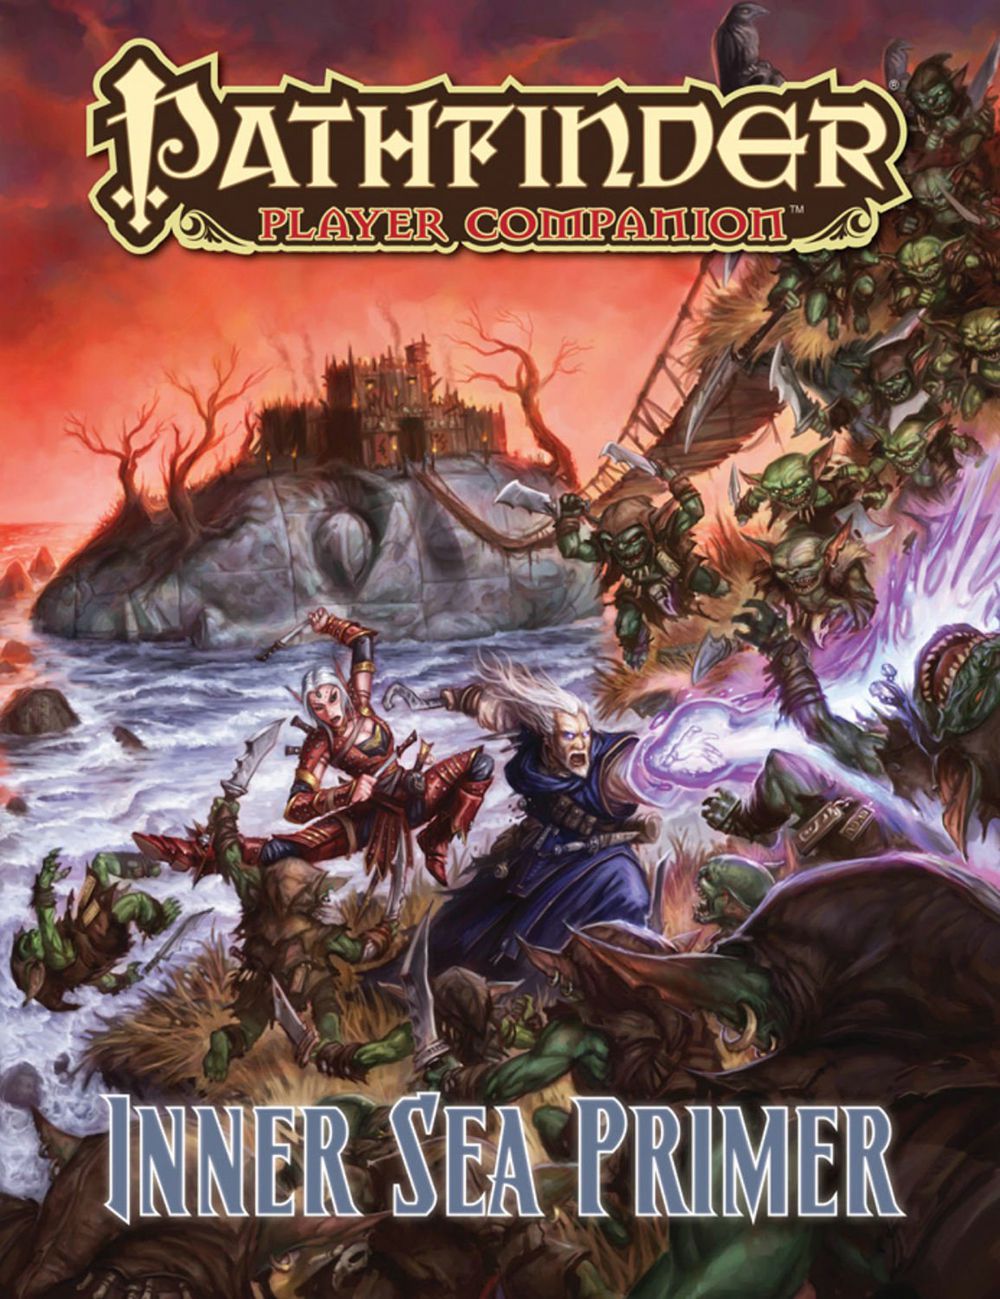 The Humble RPG Book Bundle: Pathfinder Lost Omens Lore Archive by Paizo